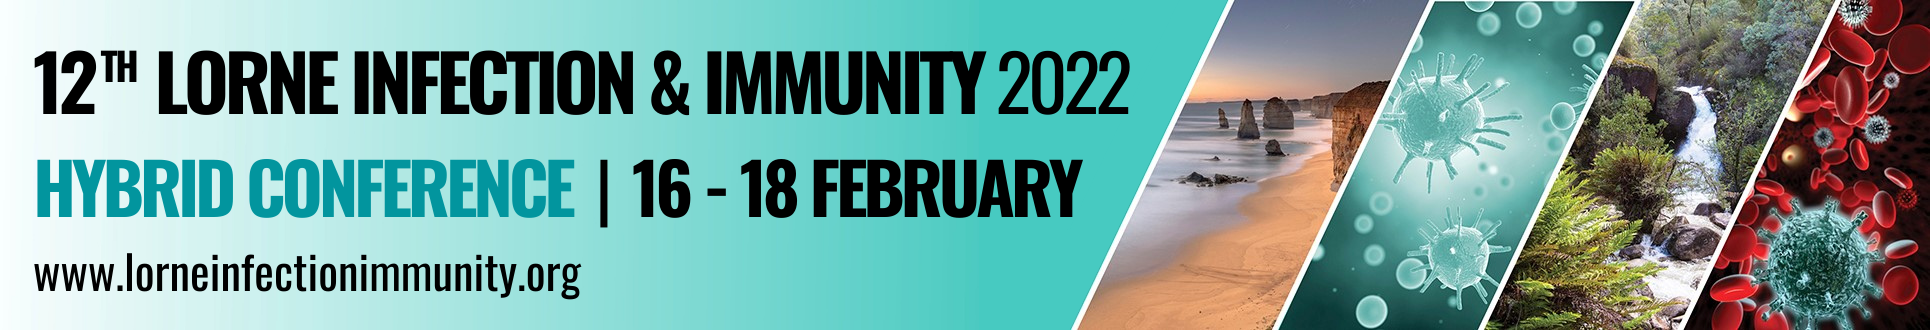 LORNE INFECTION & IMMUNITY 2022 - Banner.png